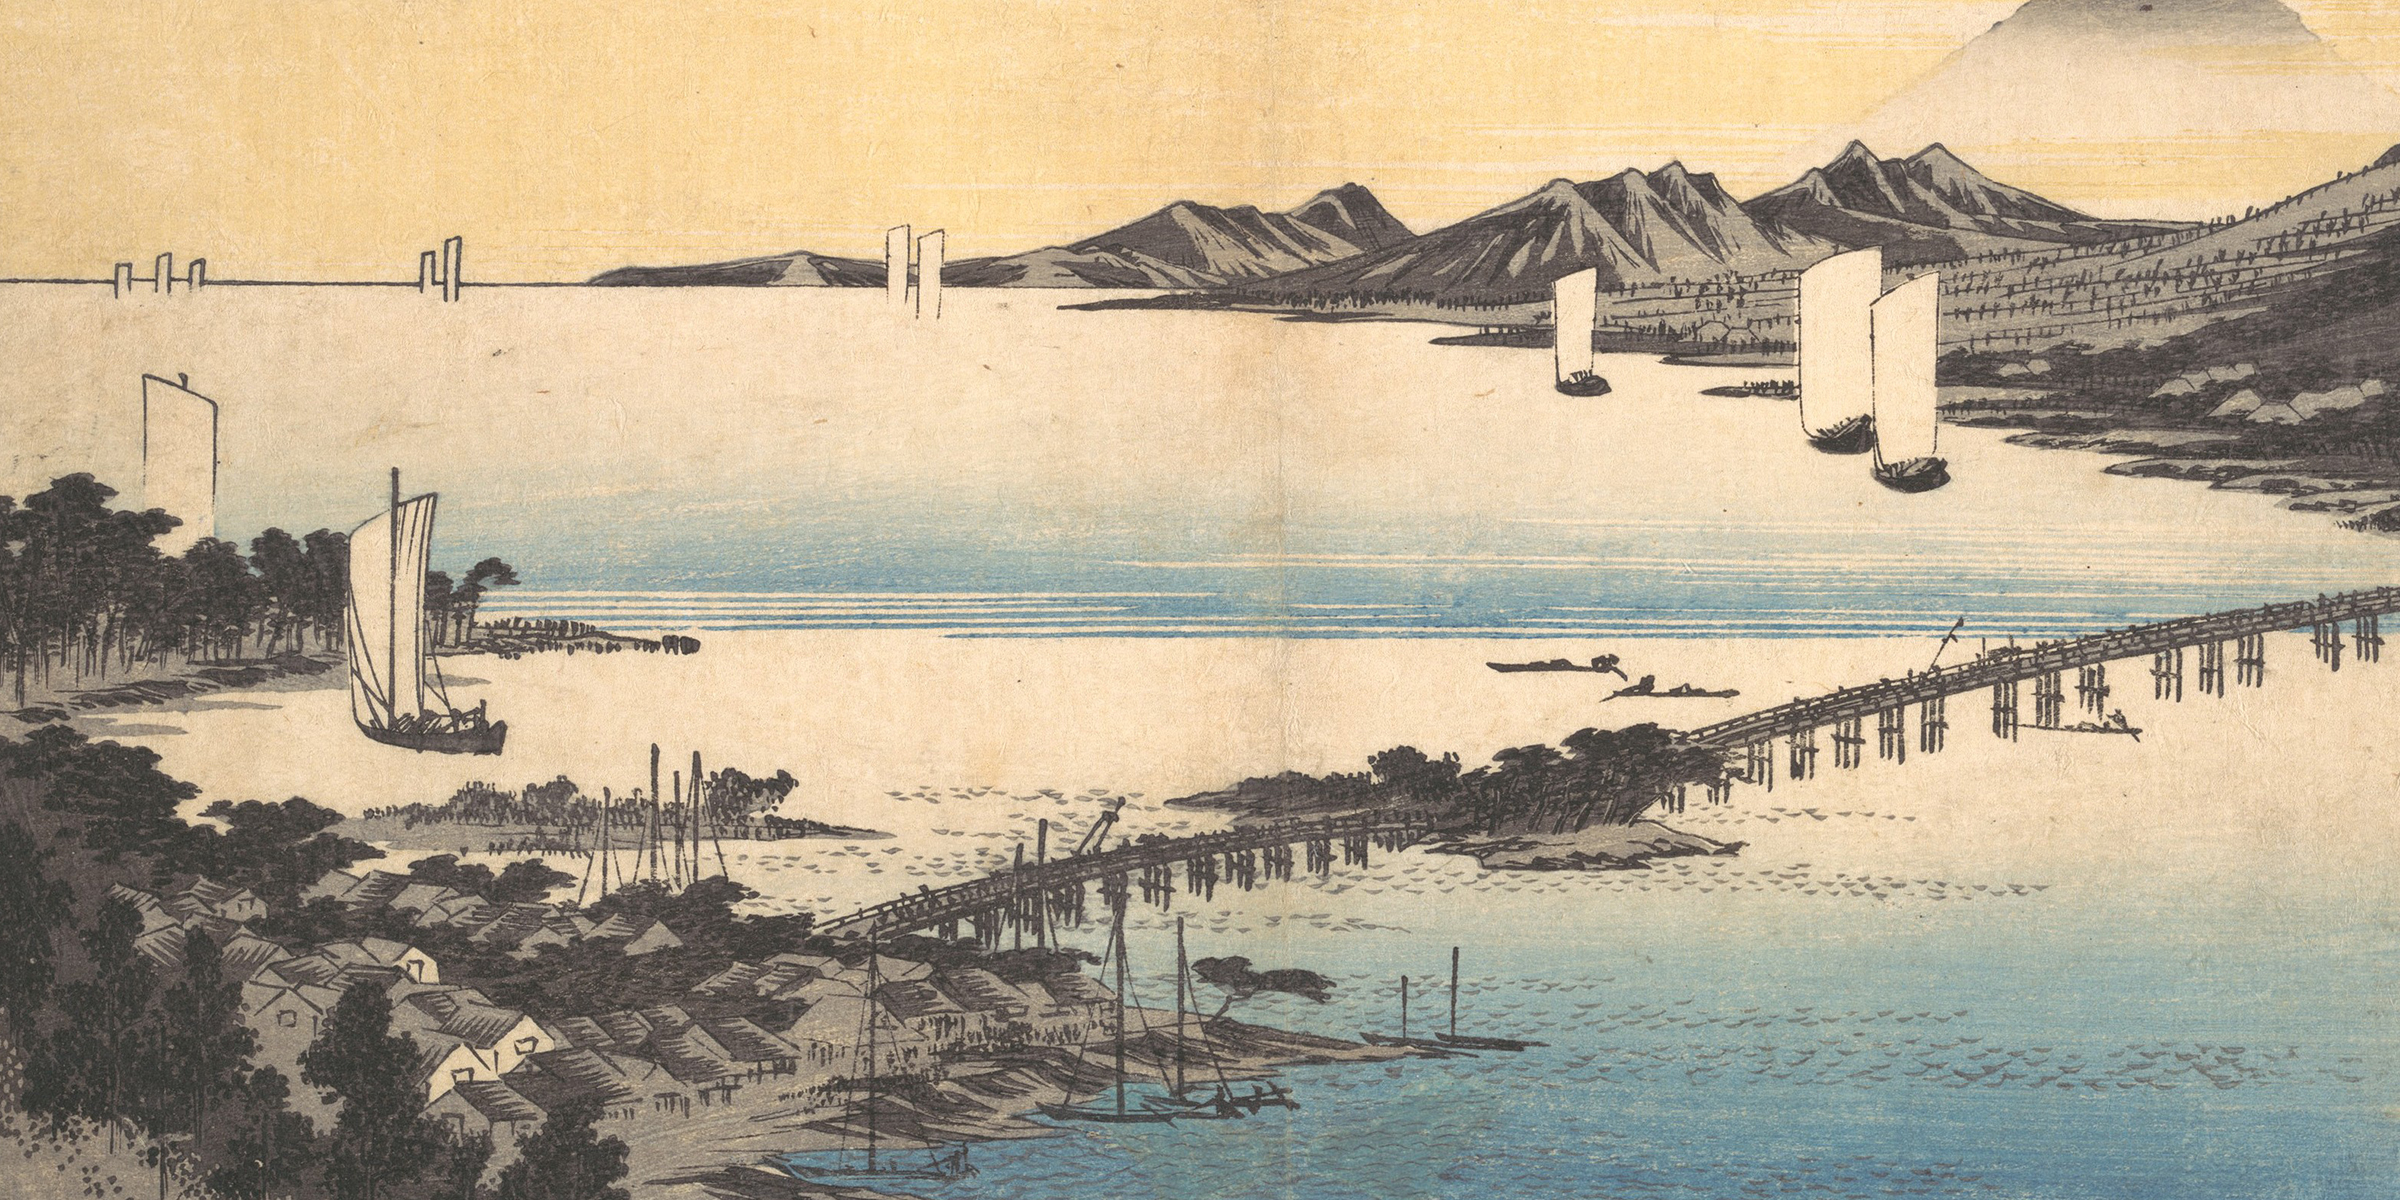 Sunset at Seta (detail), by Hiroshige, early nineteenth century. The Metropolitan Museum of Art. Henry L. Phillips Collection, bequest of Henry L. Phillips, 1939.